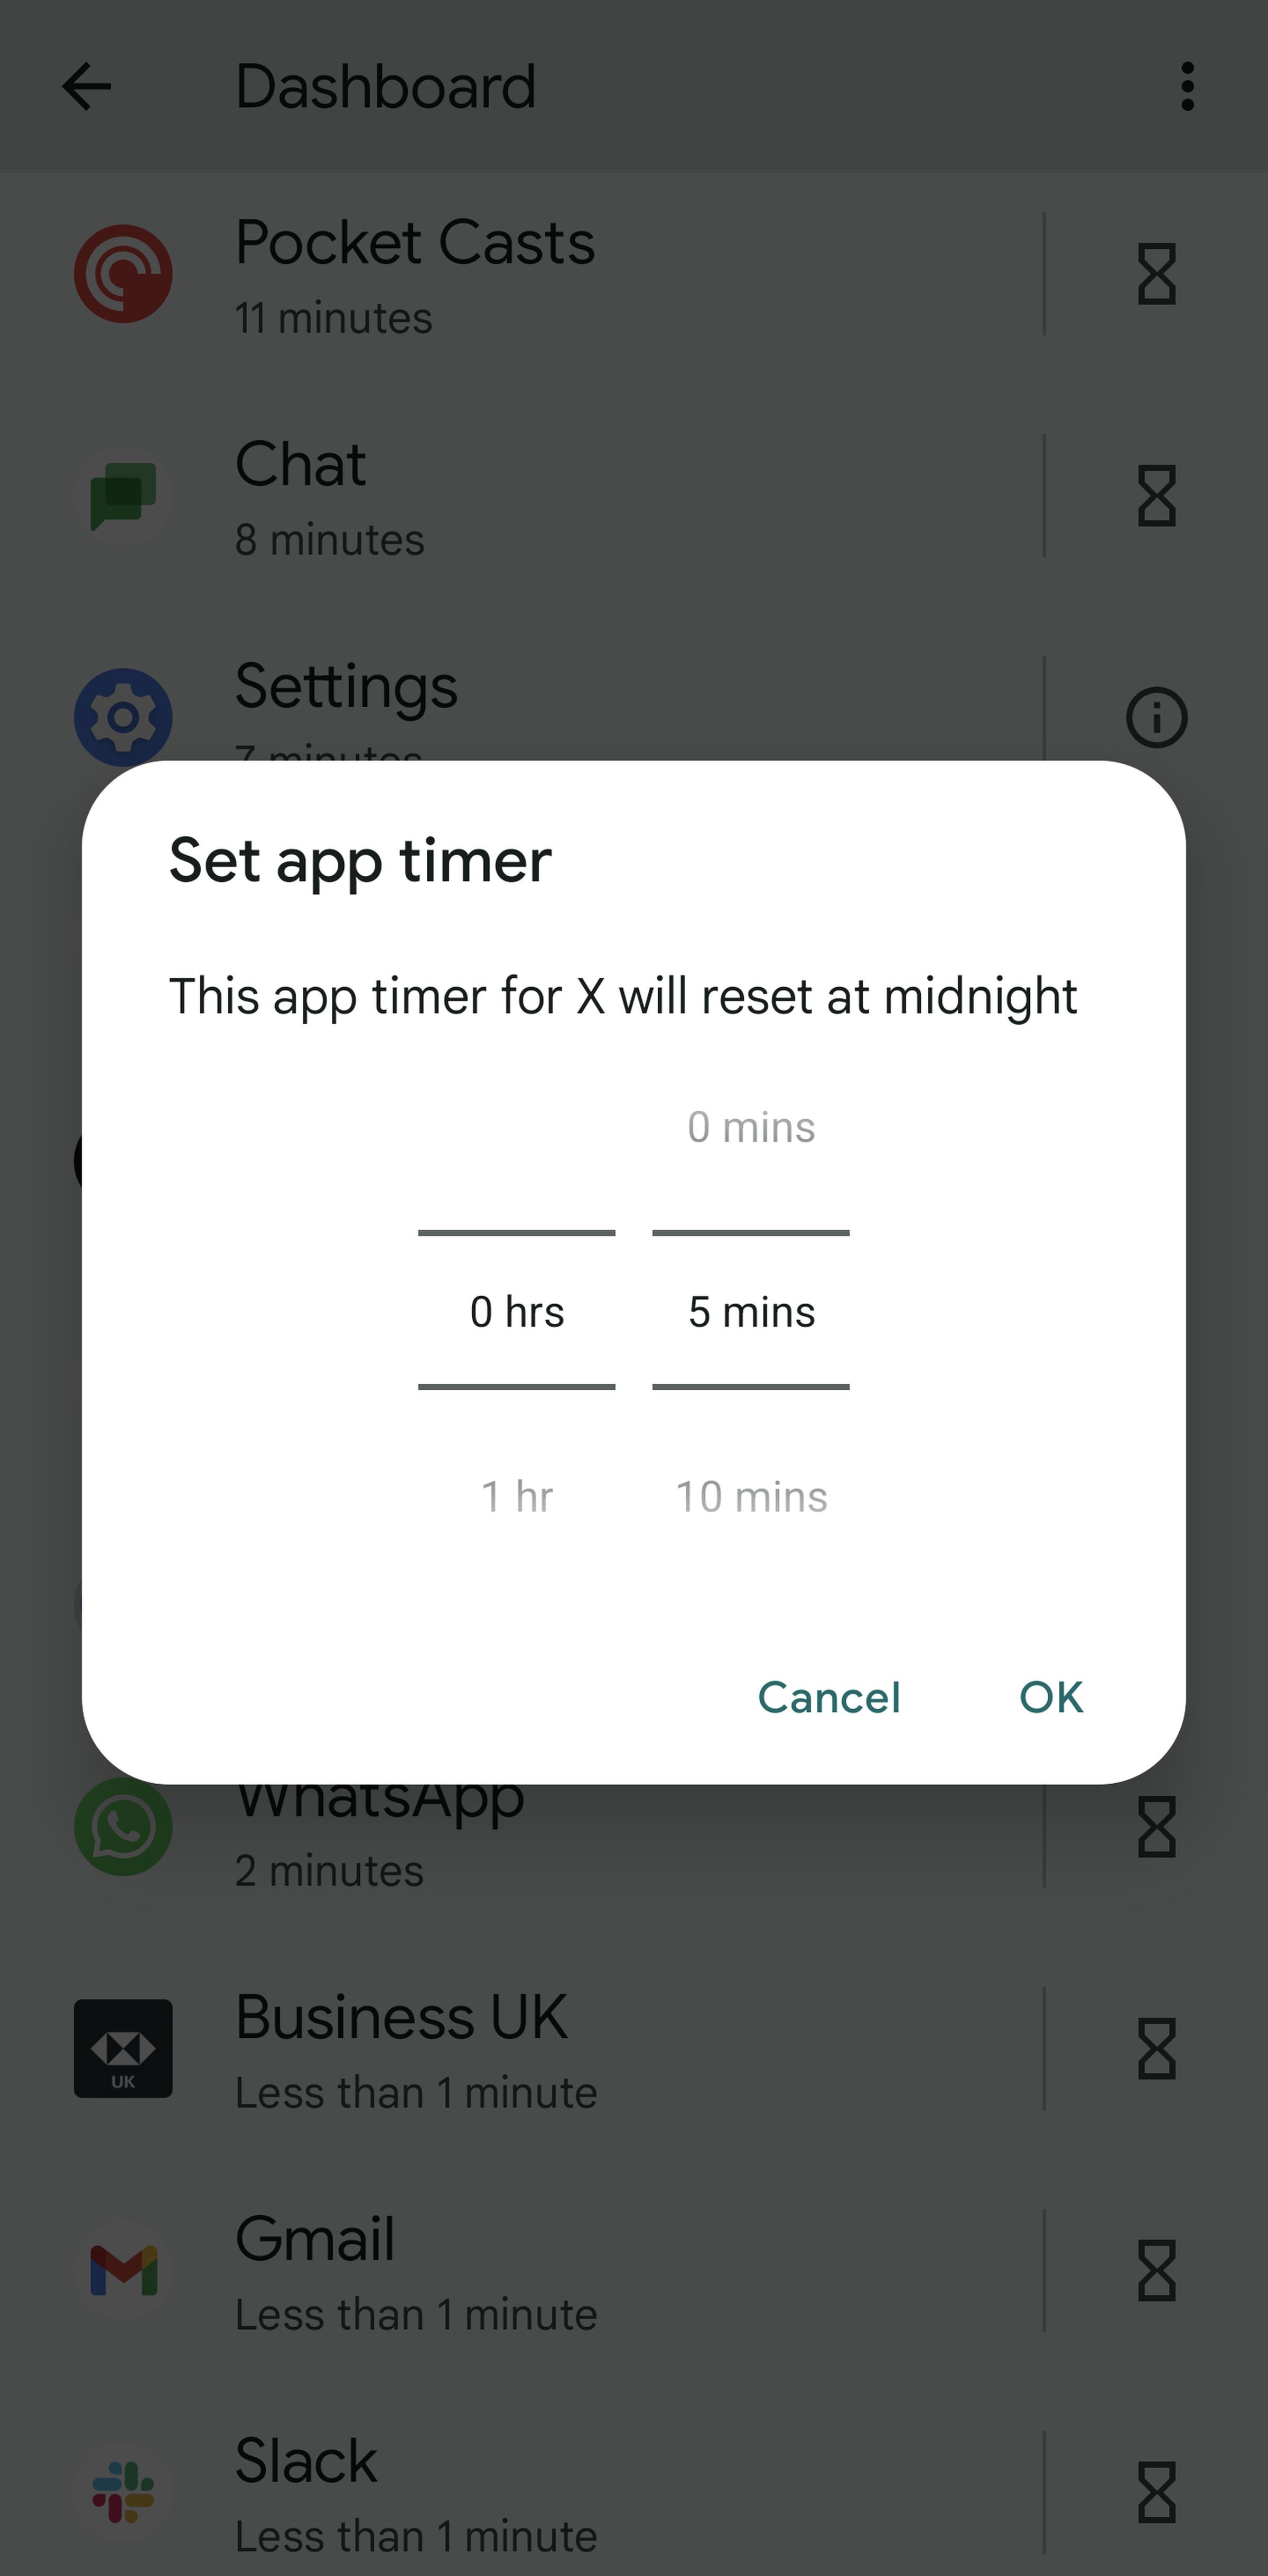 Pop-up windows headed “Set app timer” with a time set of 0 hrs and 5 mins.